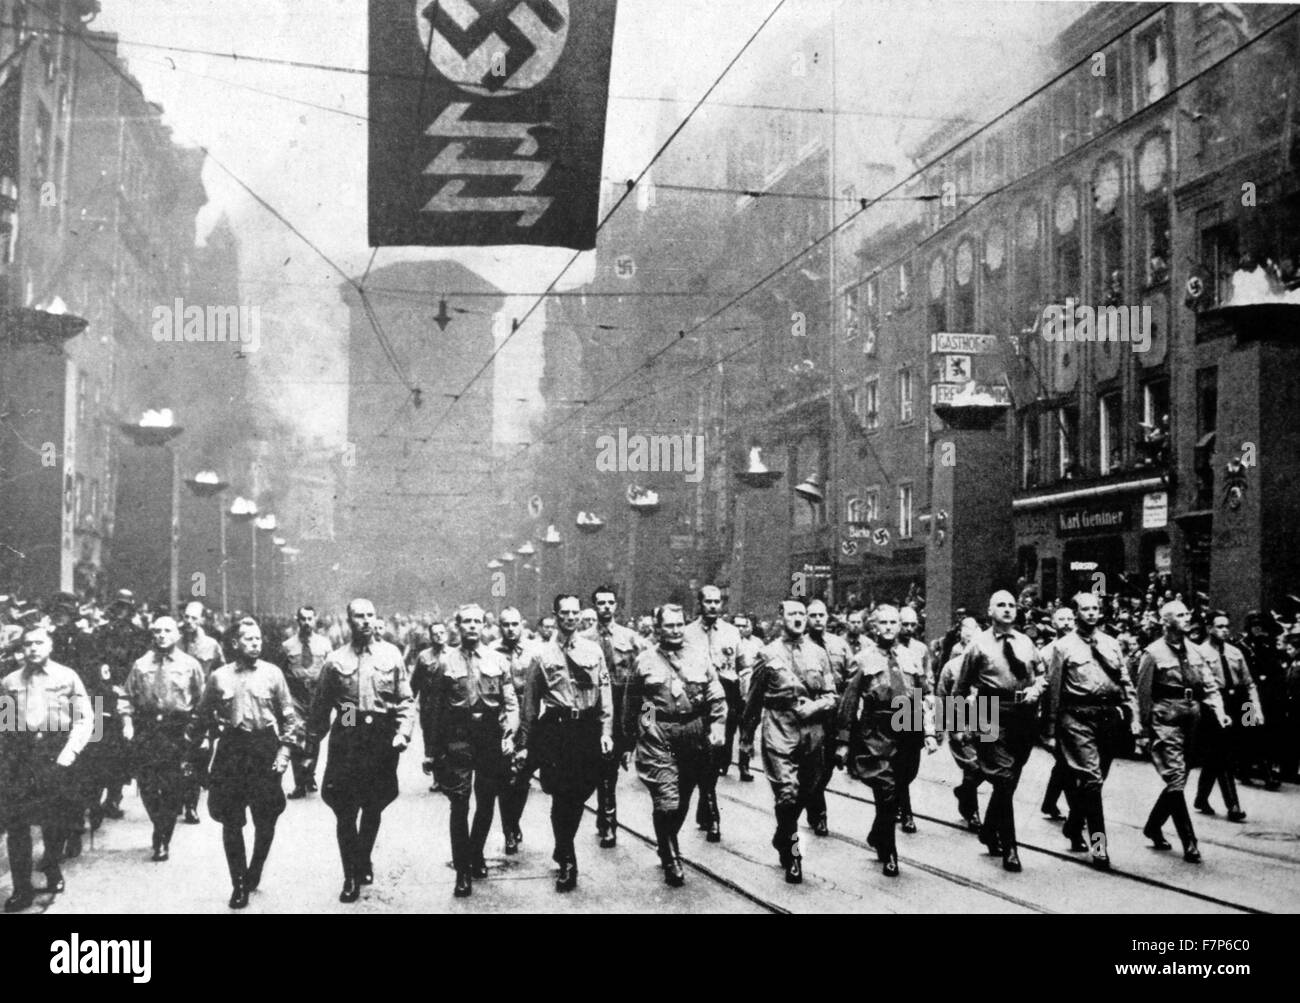 Adolf Hitler and the Nazis marching against the Treaty of Versailles. Stock Photo